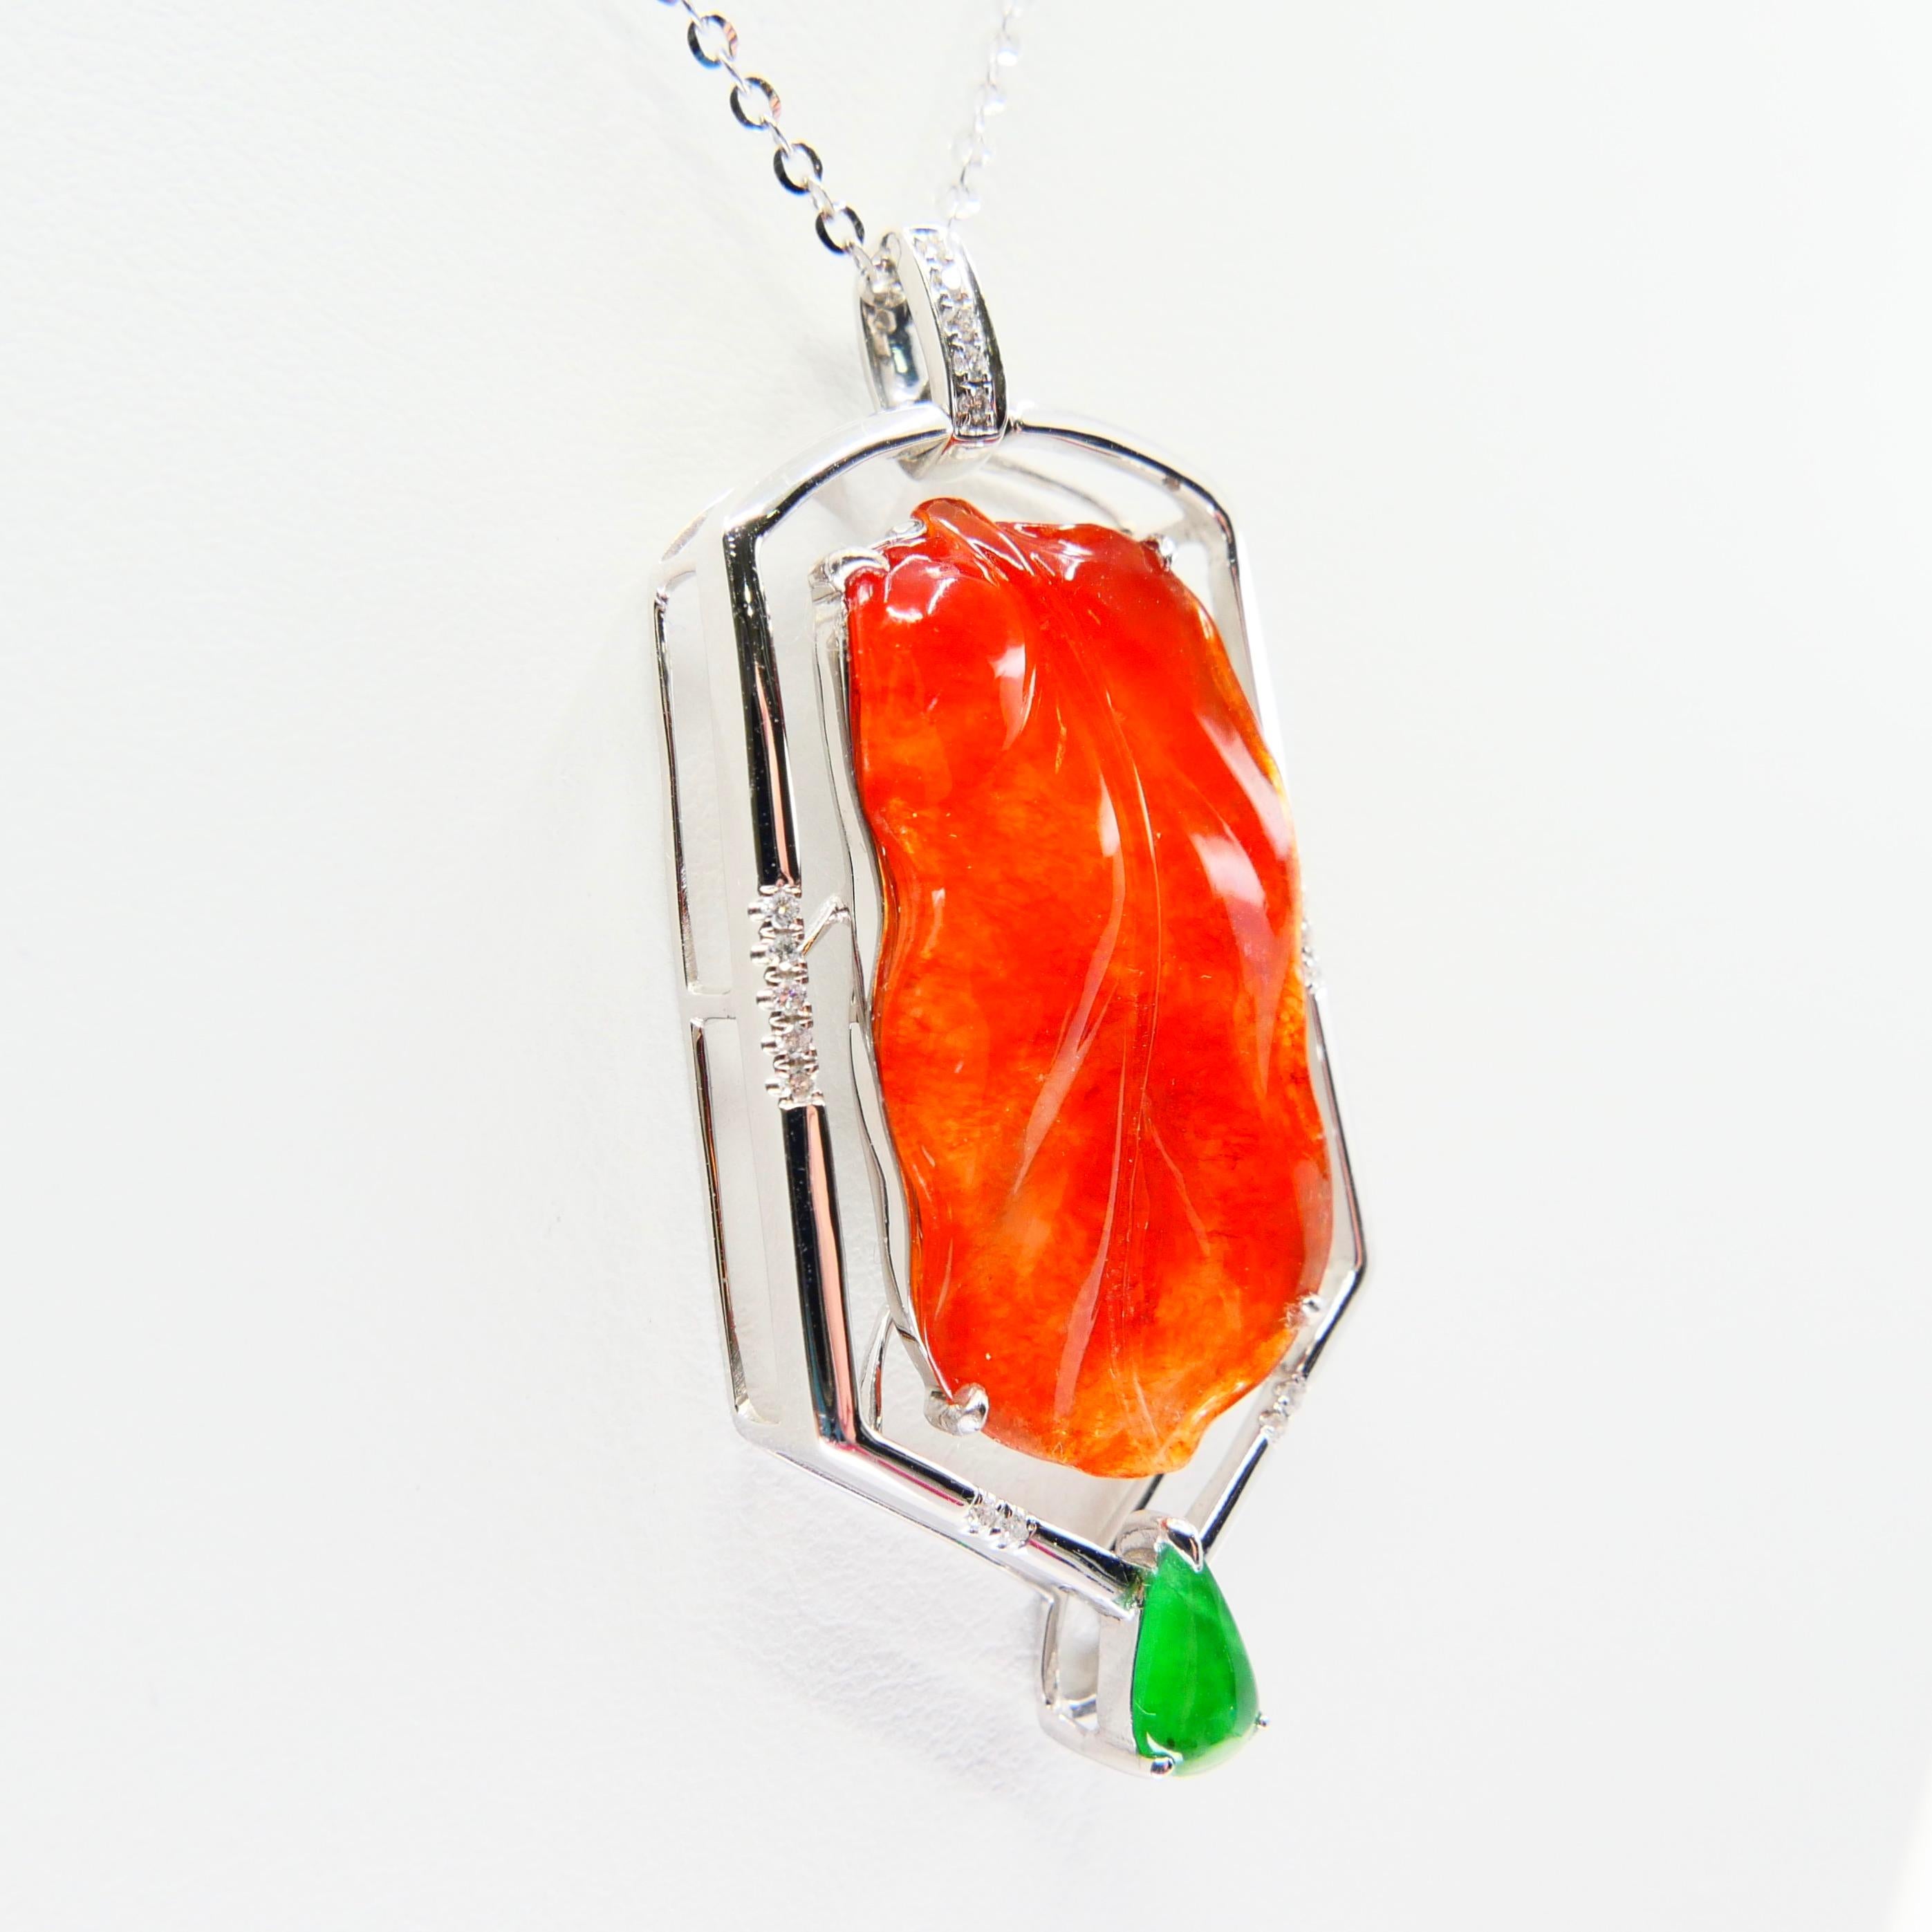 Certified Natural Icy Red Jade, Diamonds, Apple Green Jade Pendant Drop Necklace For Sale 3